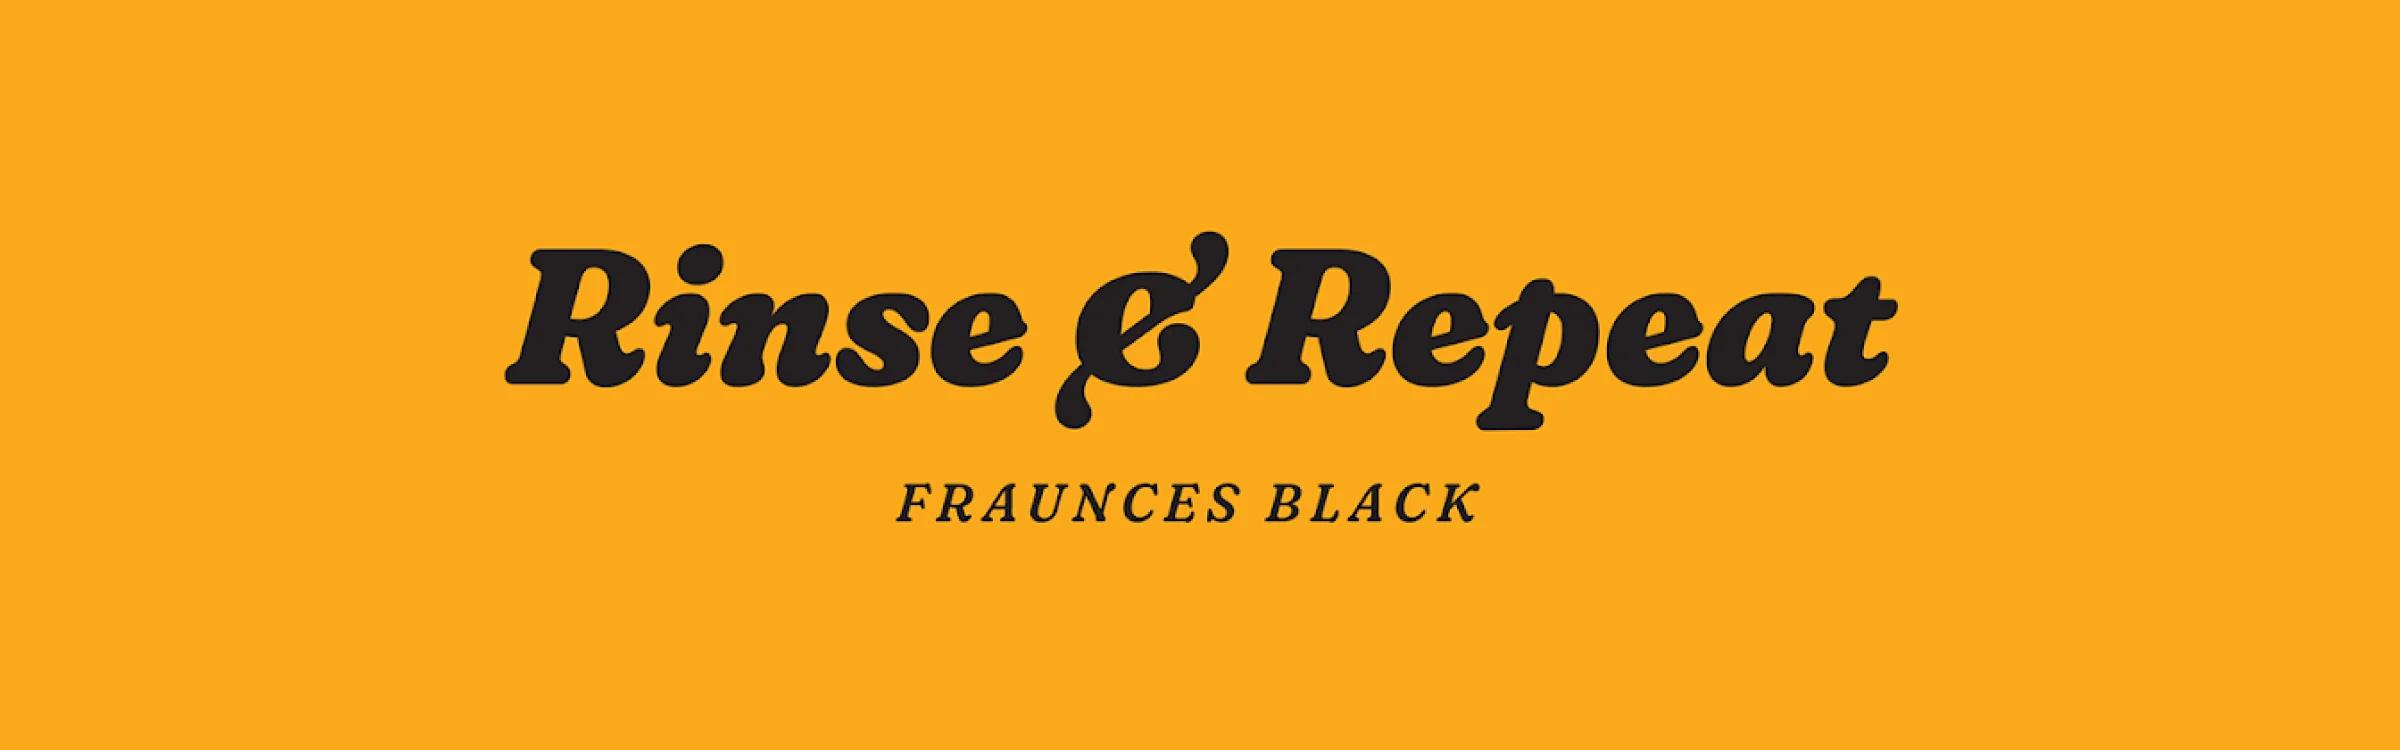 Rinse & Repeat black text on orange and light beige backgrounds